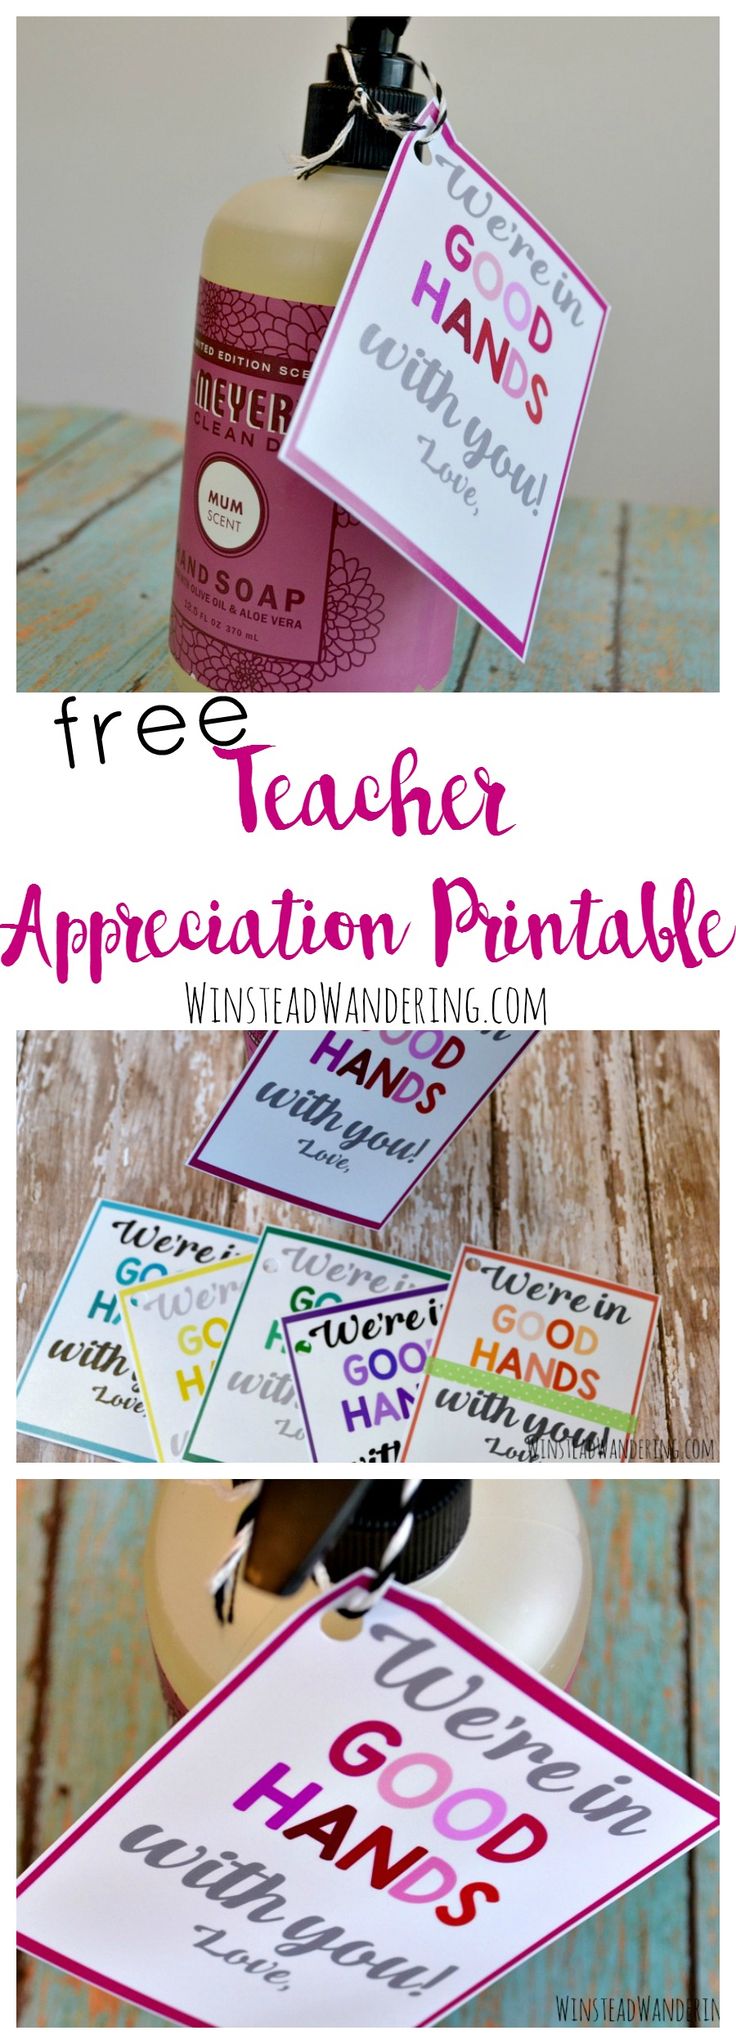 Snag a free teacher appreciation printable in a bunch of fun colors. Find inexpe...